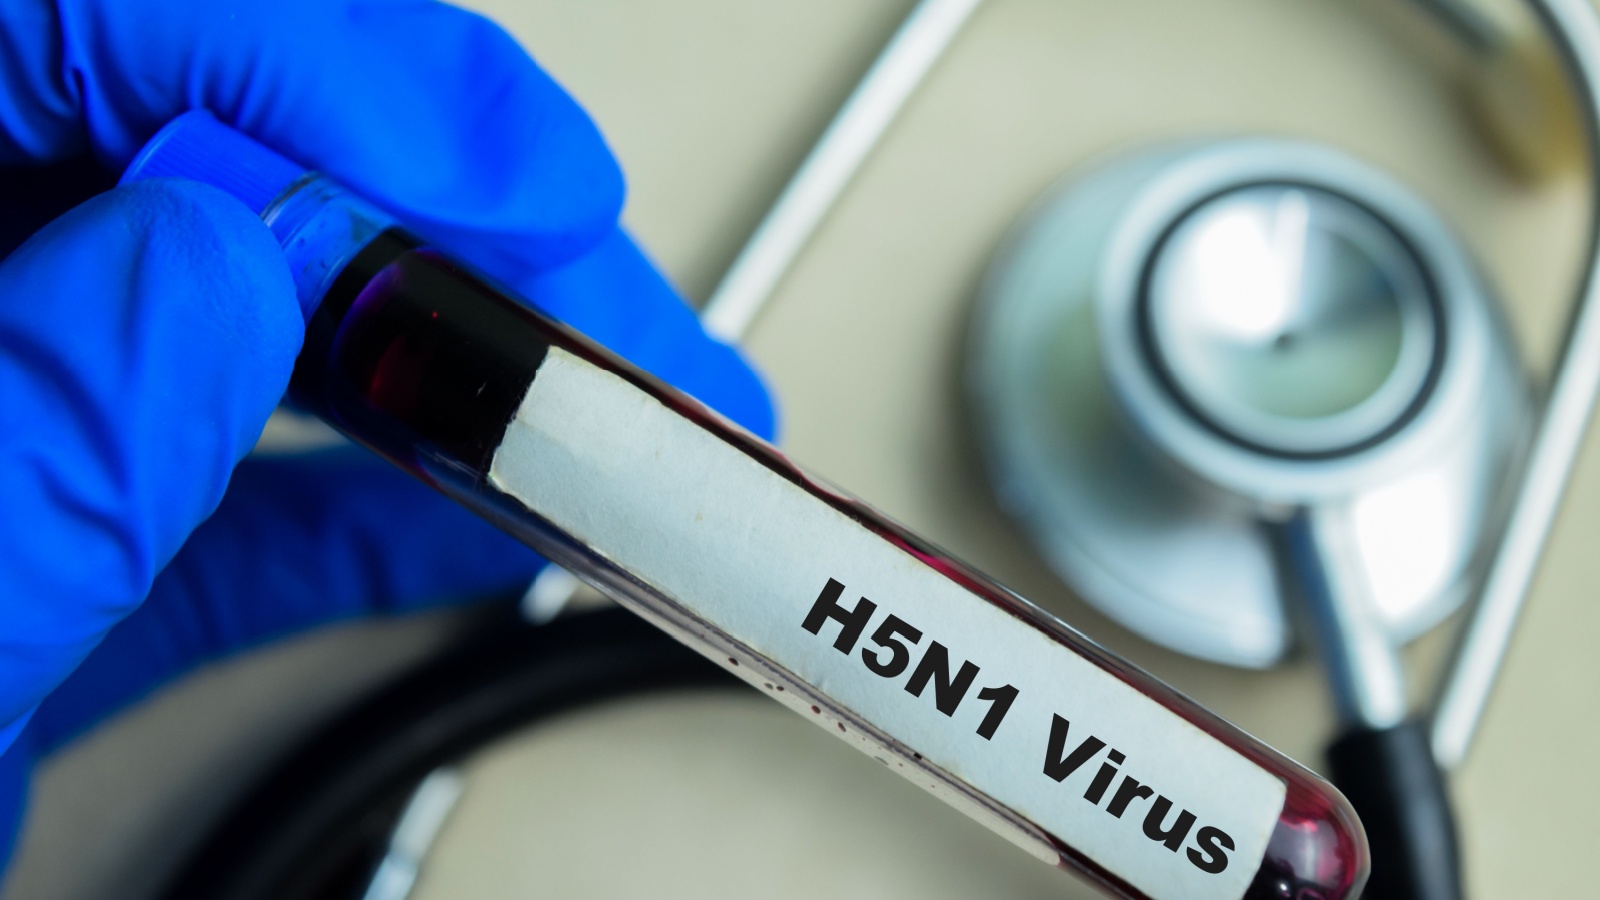 H5N1 Virus - Test with blood sample on wooden background. Healthcare or medical concept